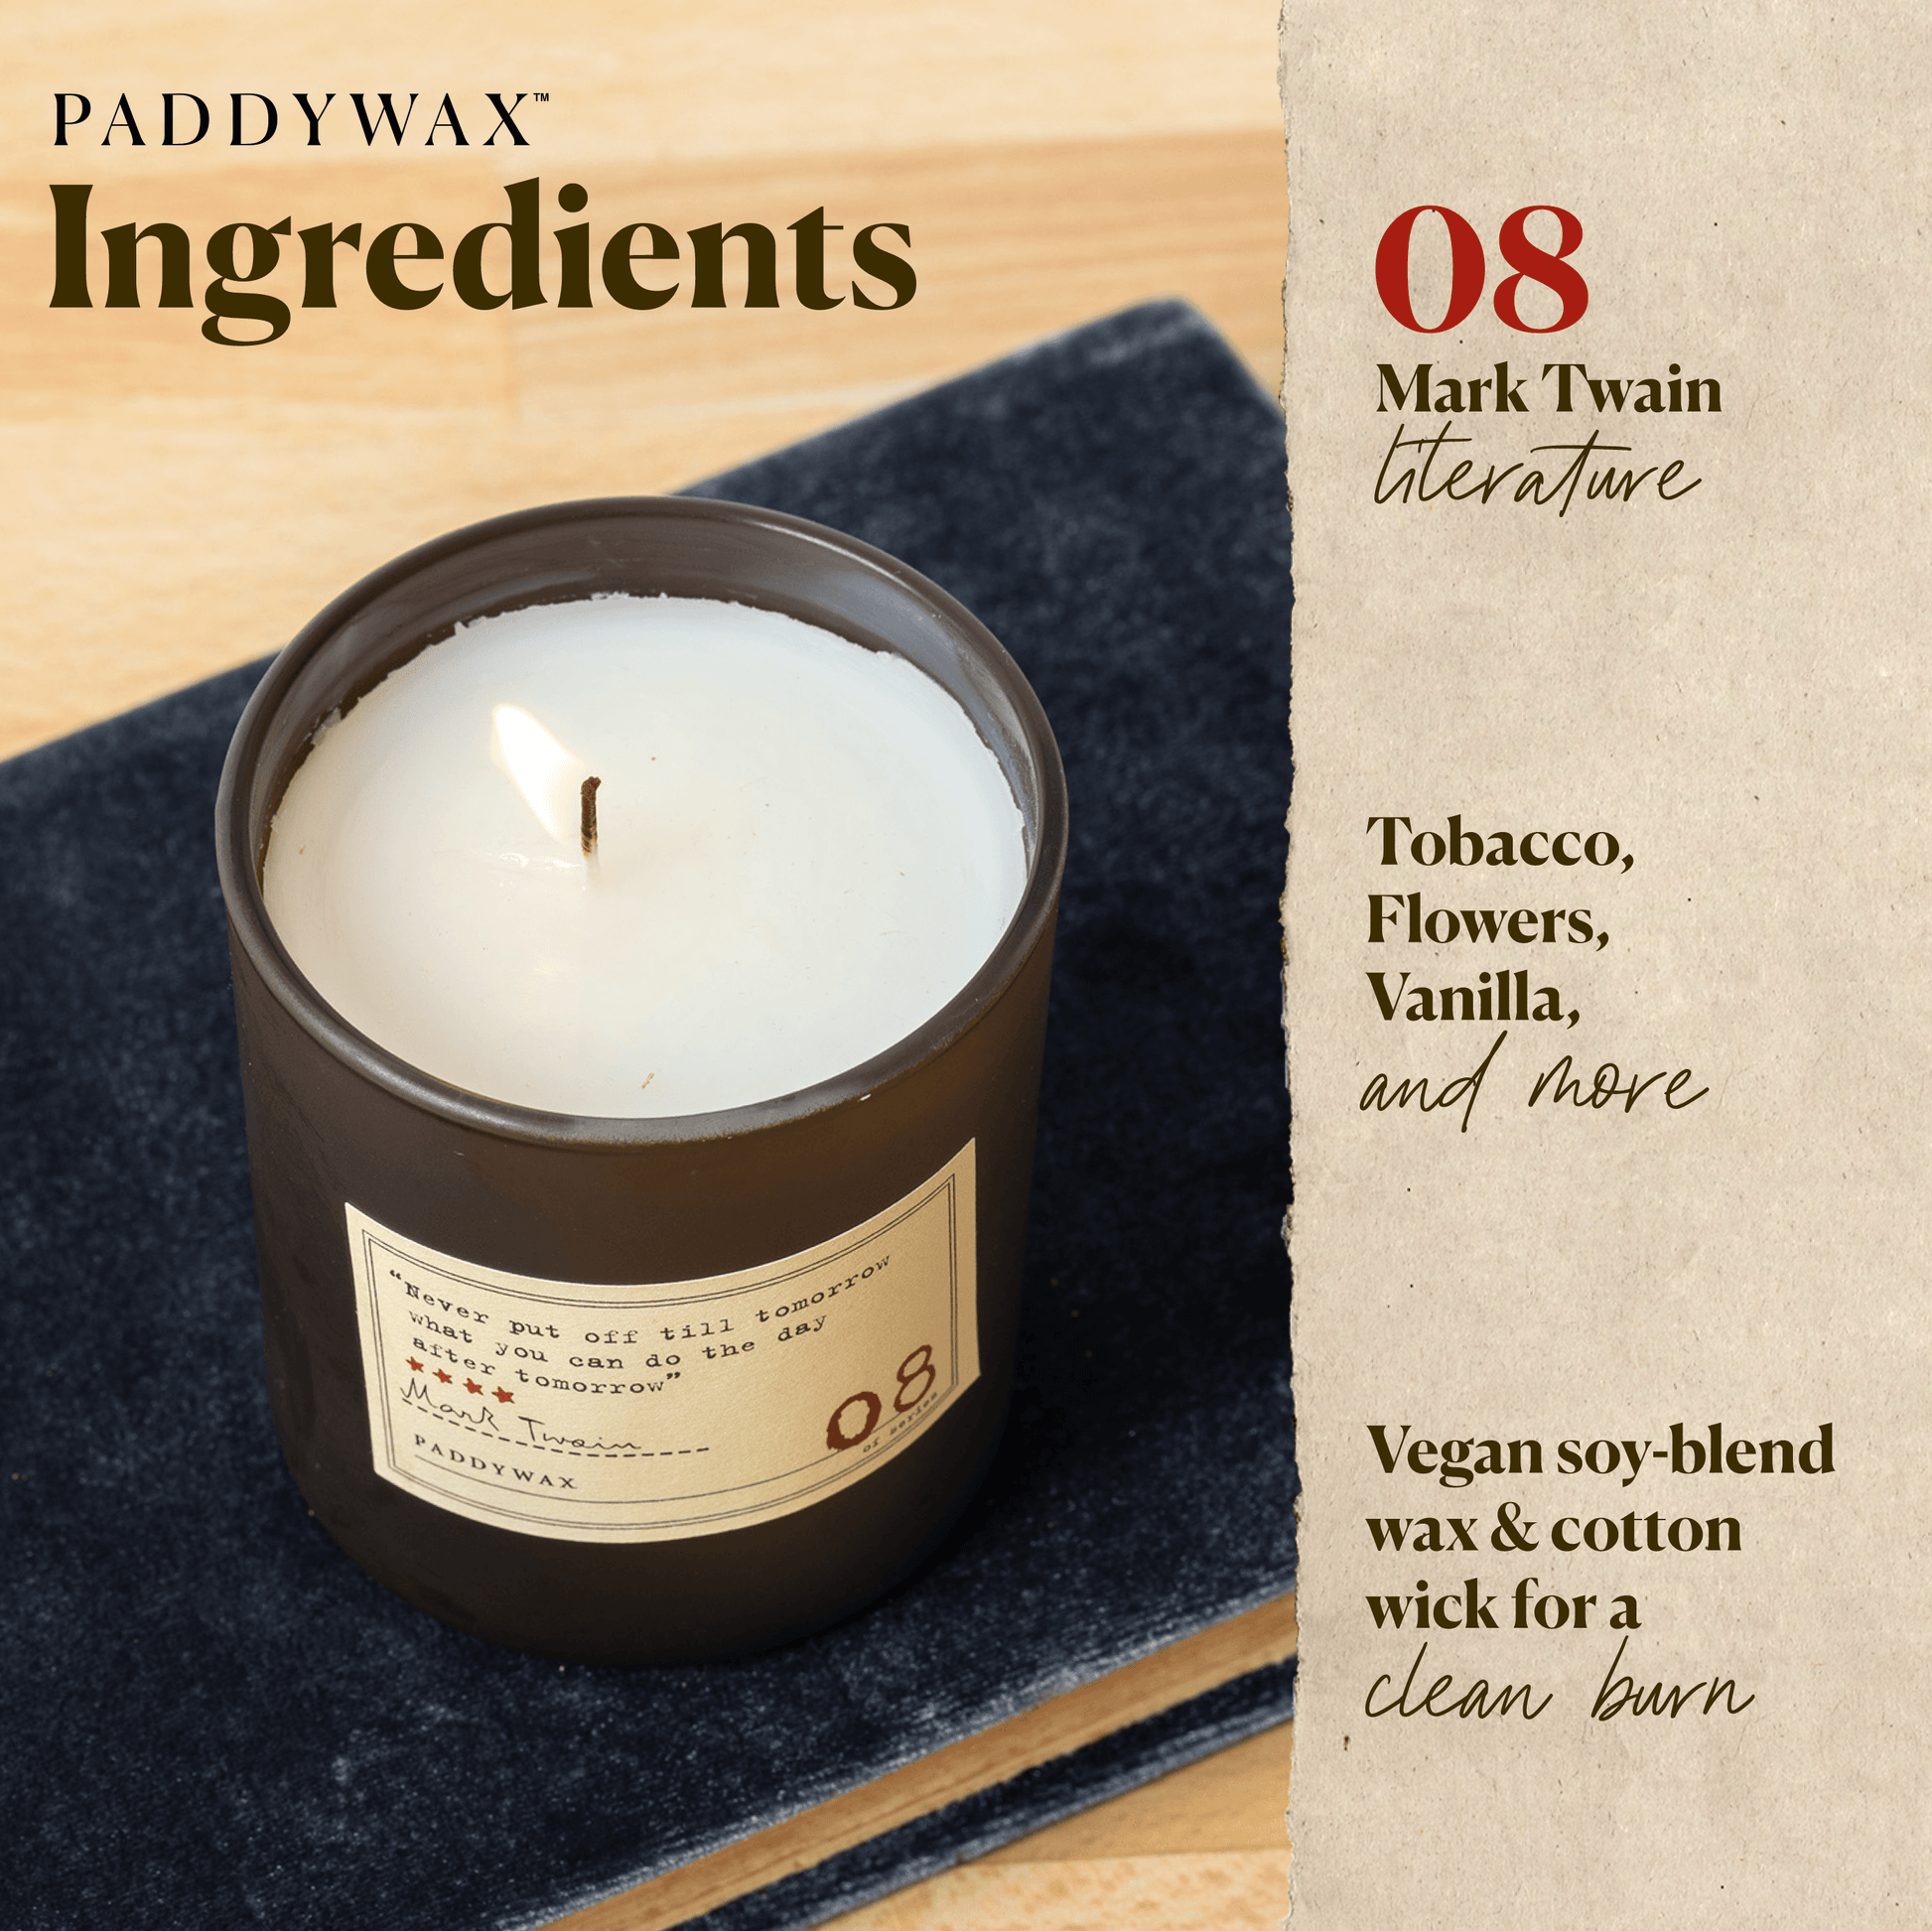 Photo of the Mark Twain Library candle with a list of ingredients. Tobacco, flowers, vanilla, and more. Vegan soy blend wax and cotton wick for a clean burn.